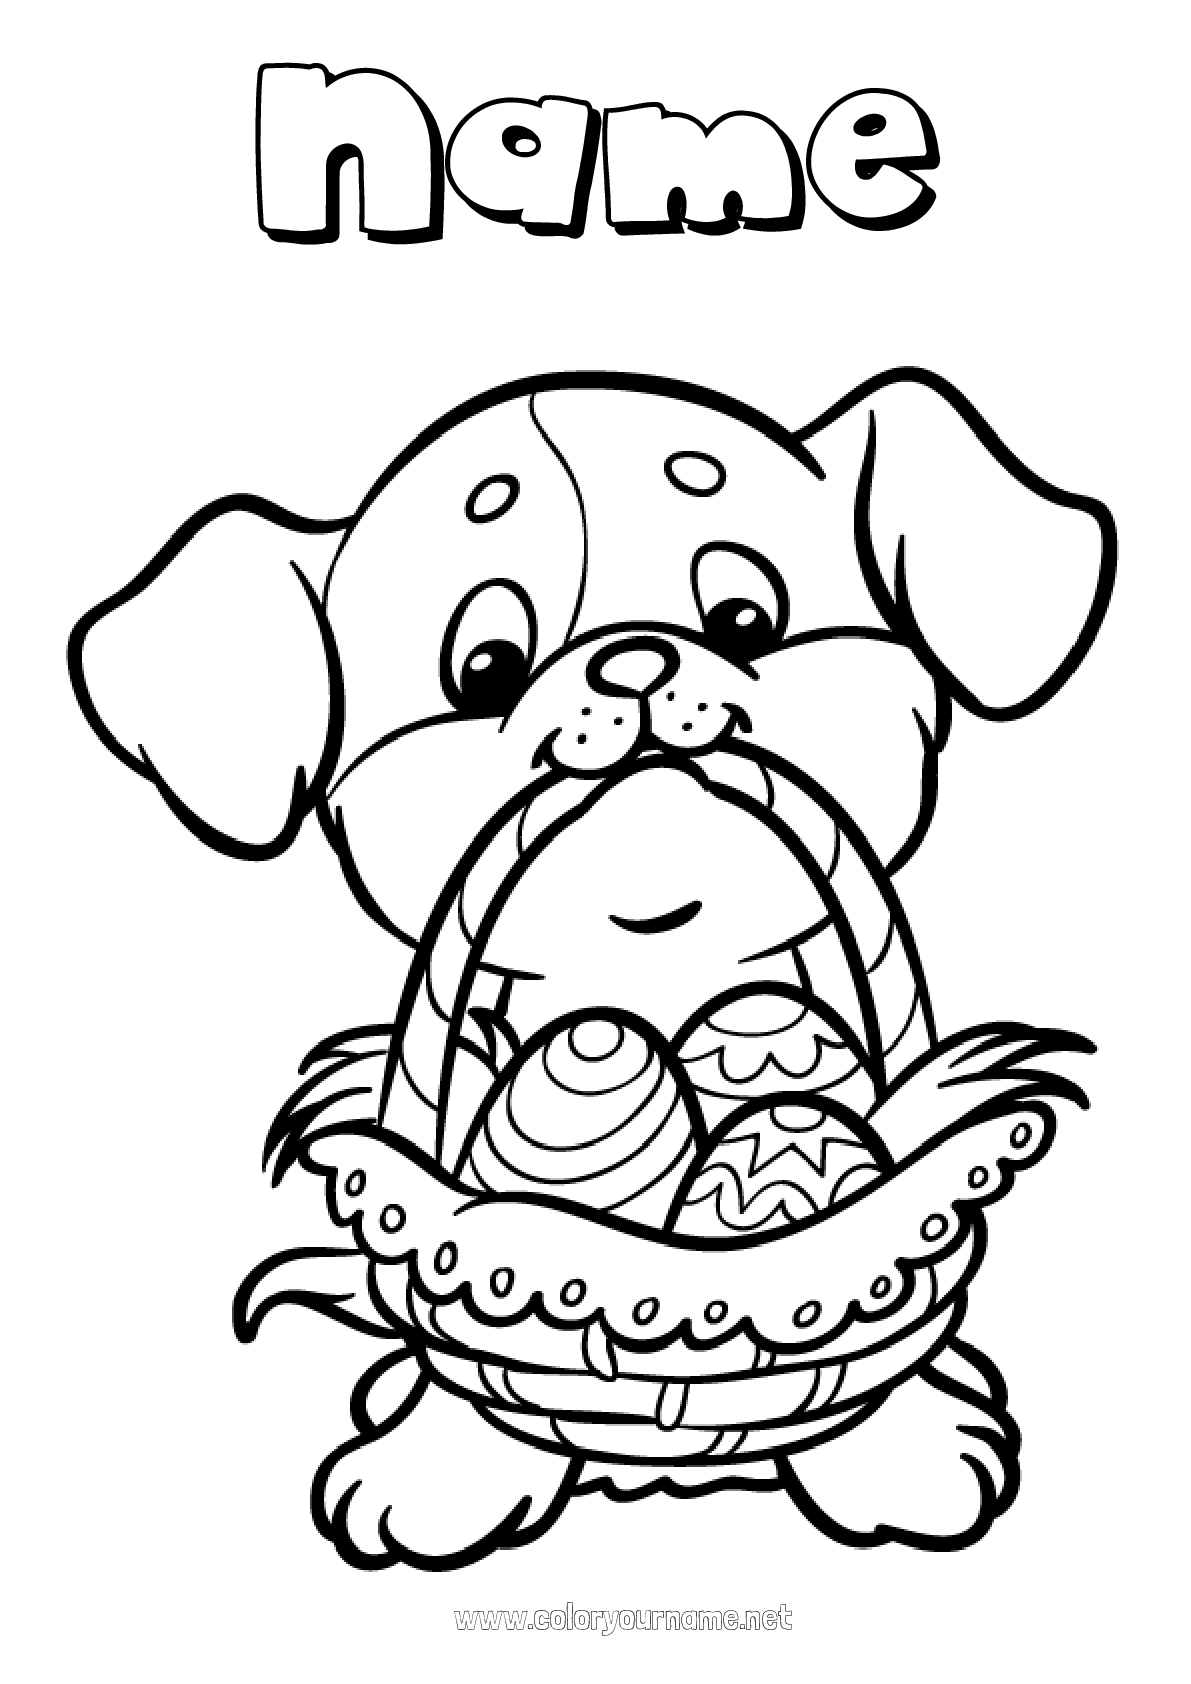 Coloring page No.1458 - Dog Animal Easter eggs